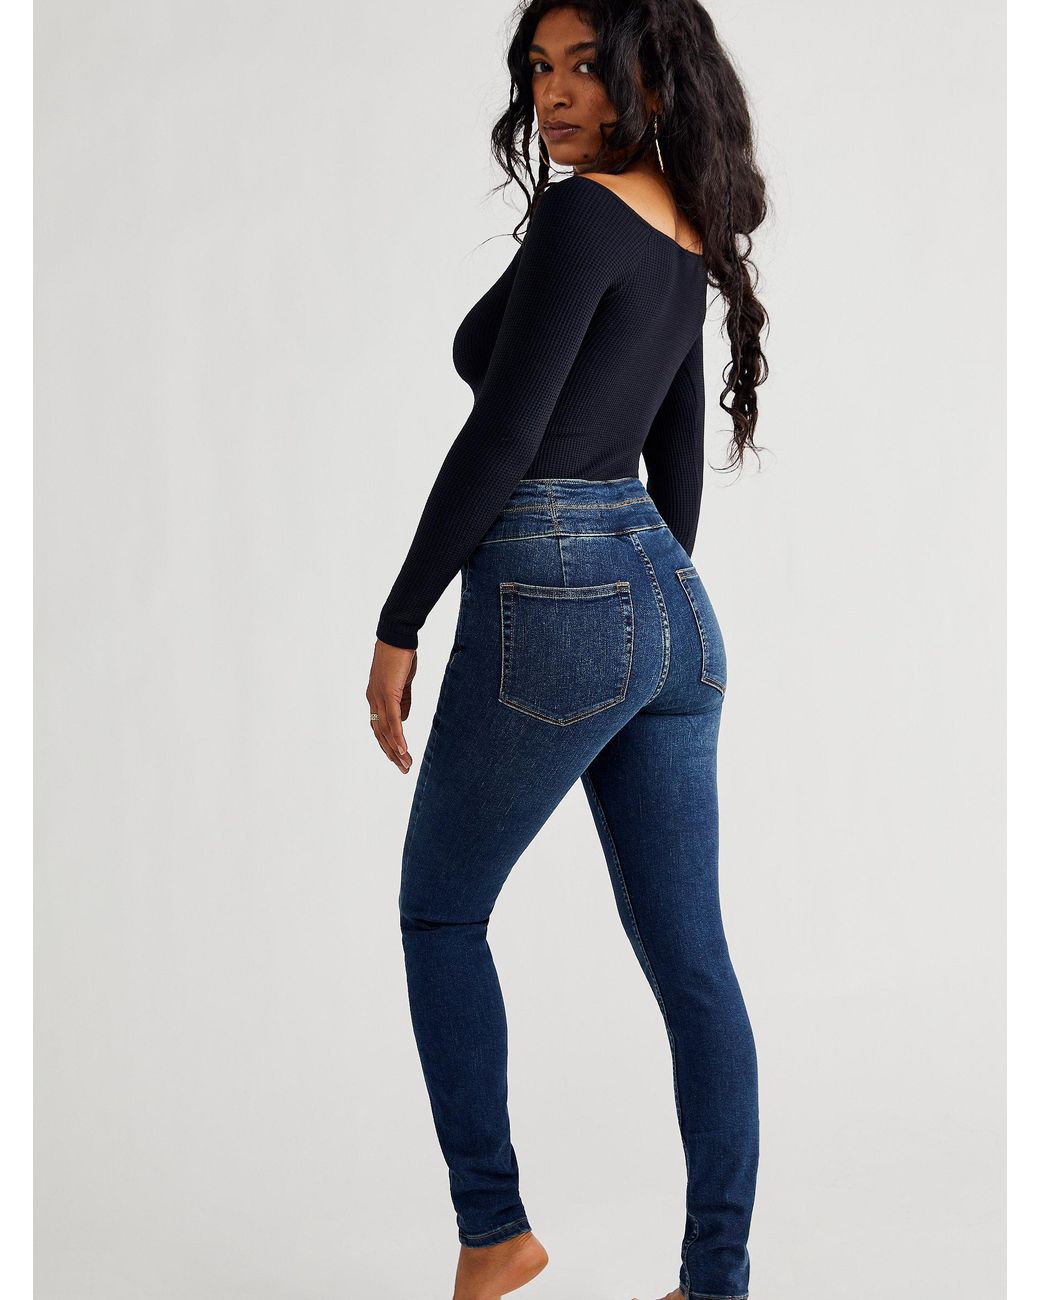 Free People Crvy High-rise Lace-up Skinny Jeans in Blue | Lyst Australia